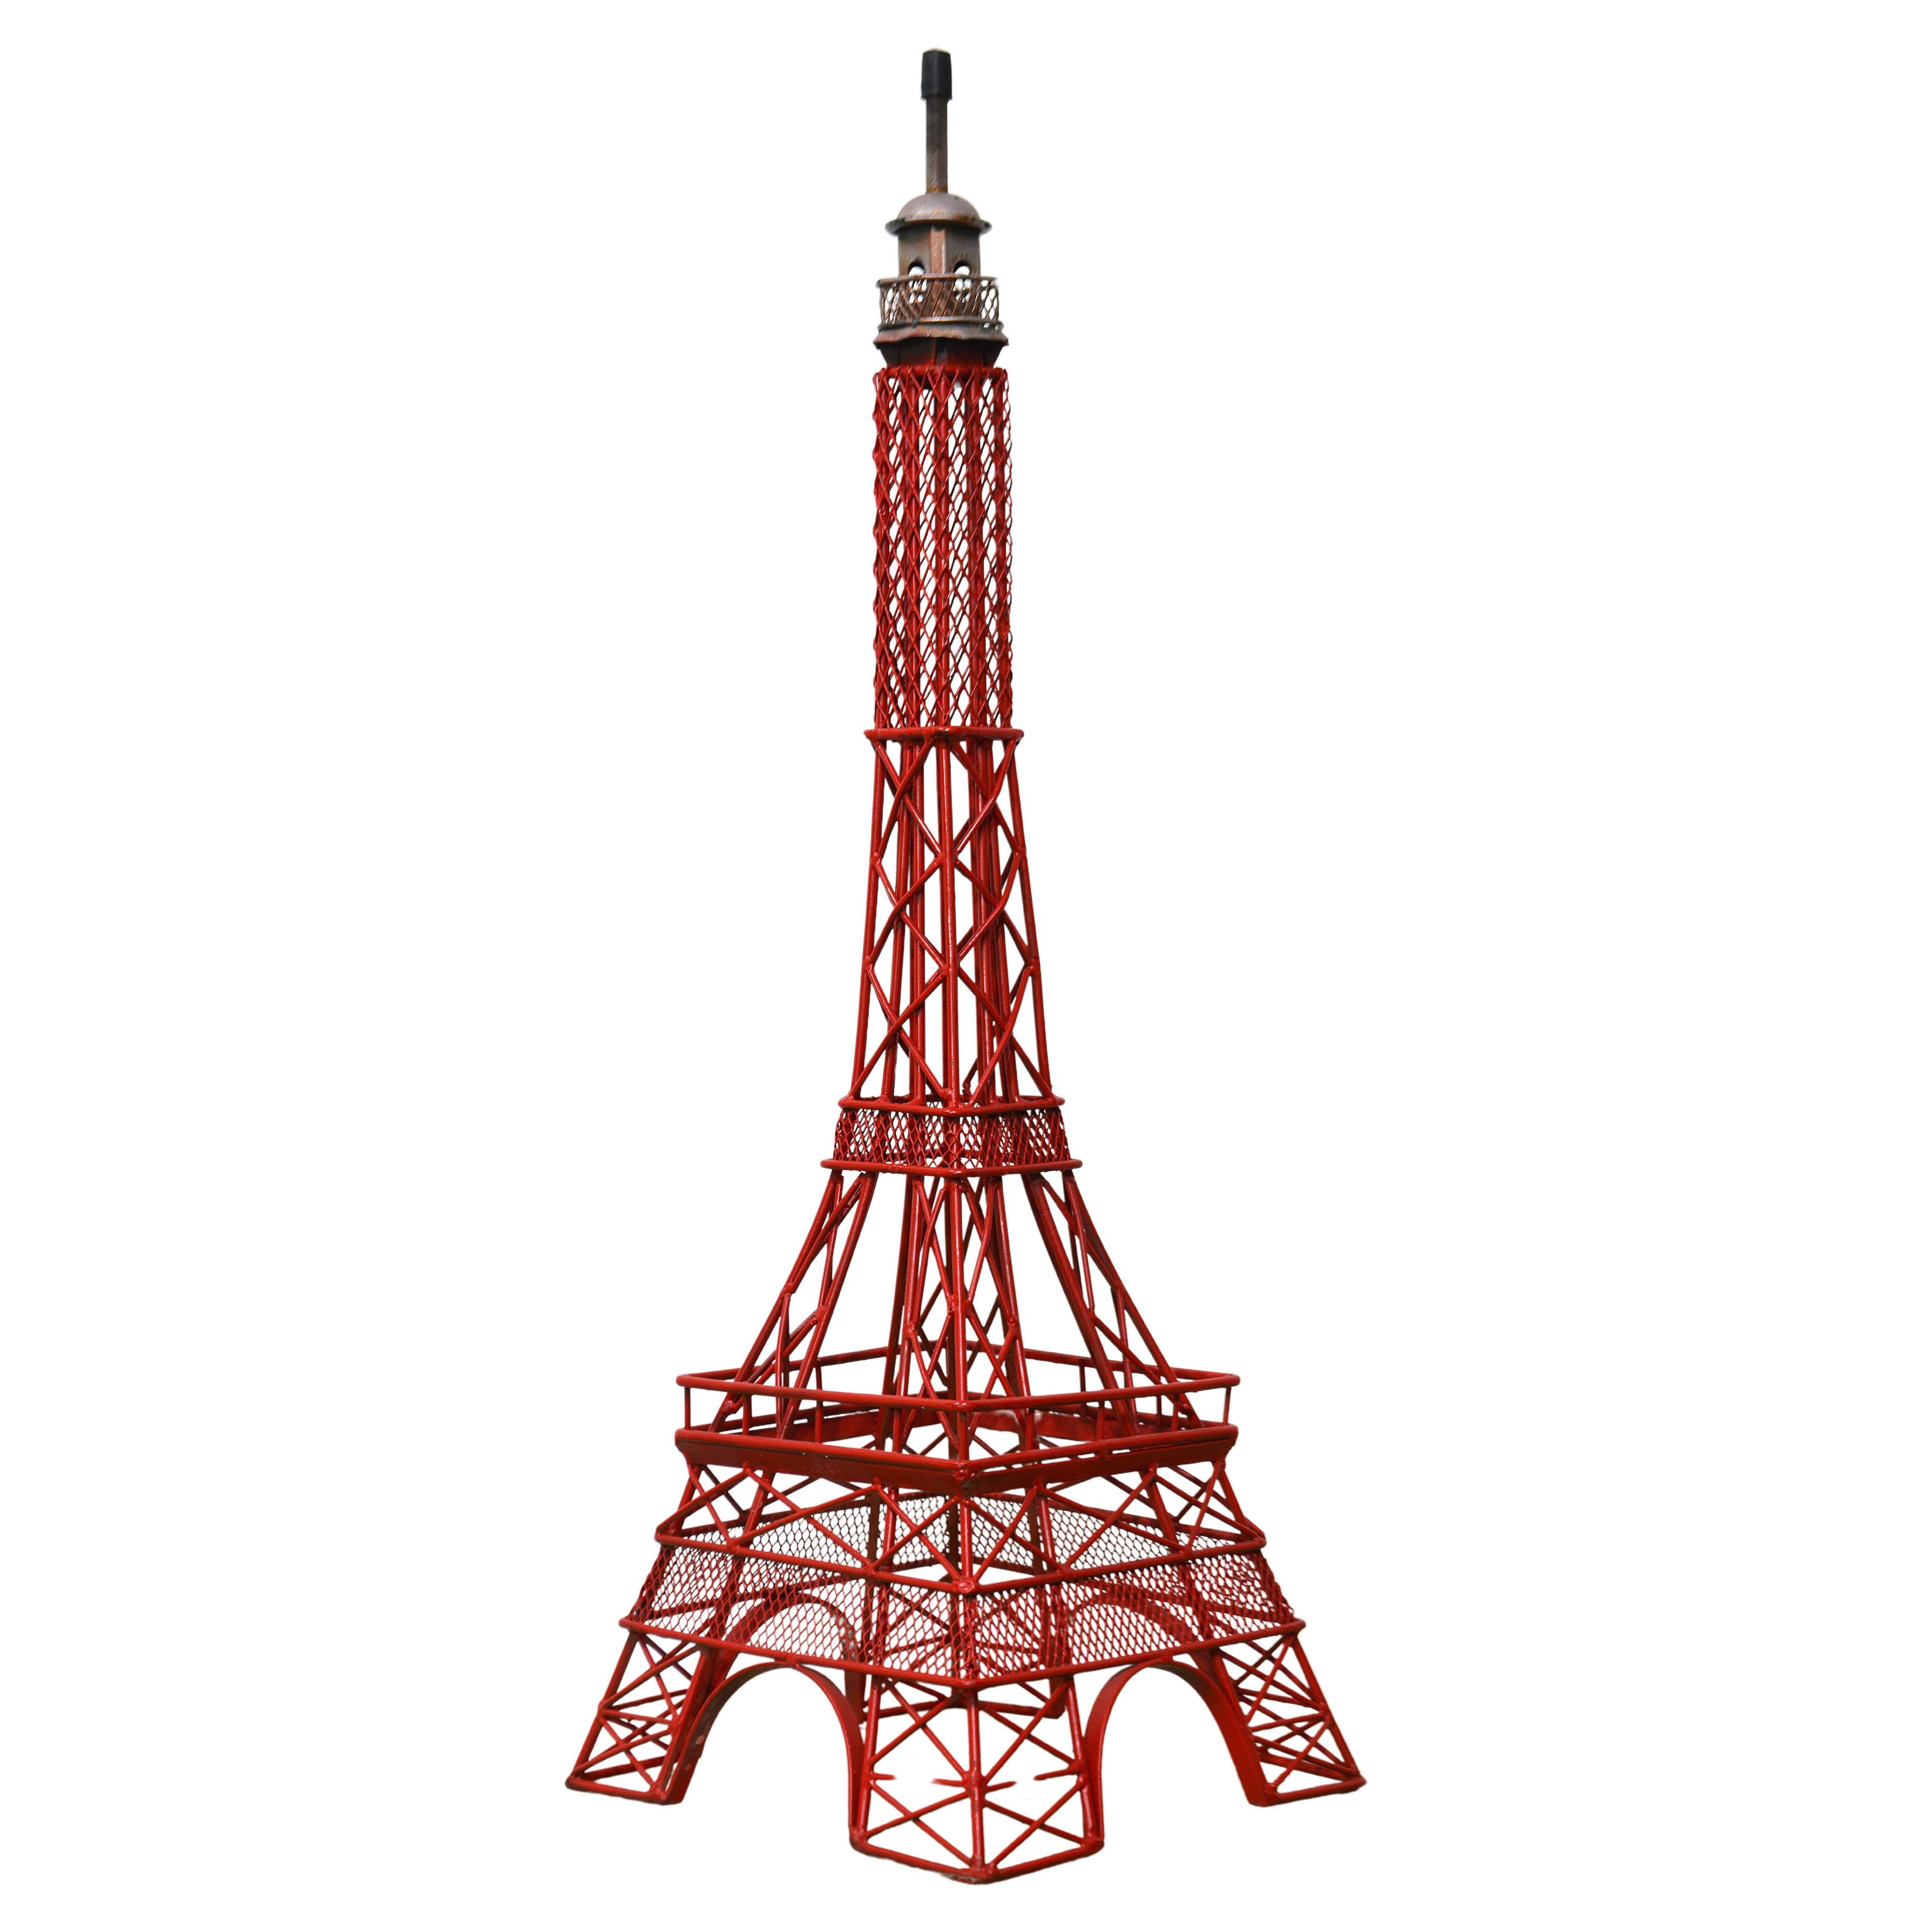 Tall Painted Decorative Steel Eifel Tower Inspired Lighthouse Sculpture or Model For Sale